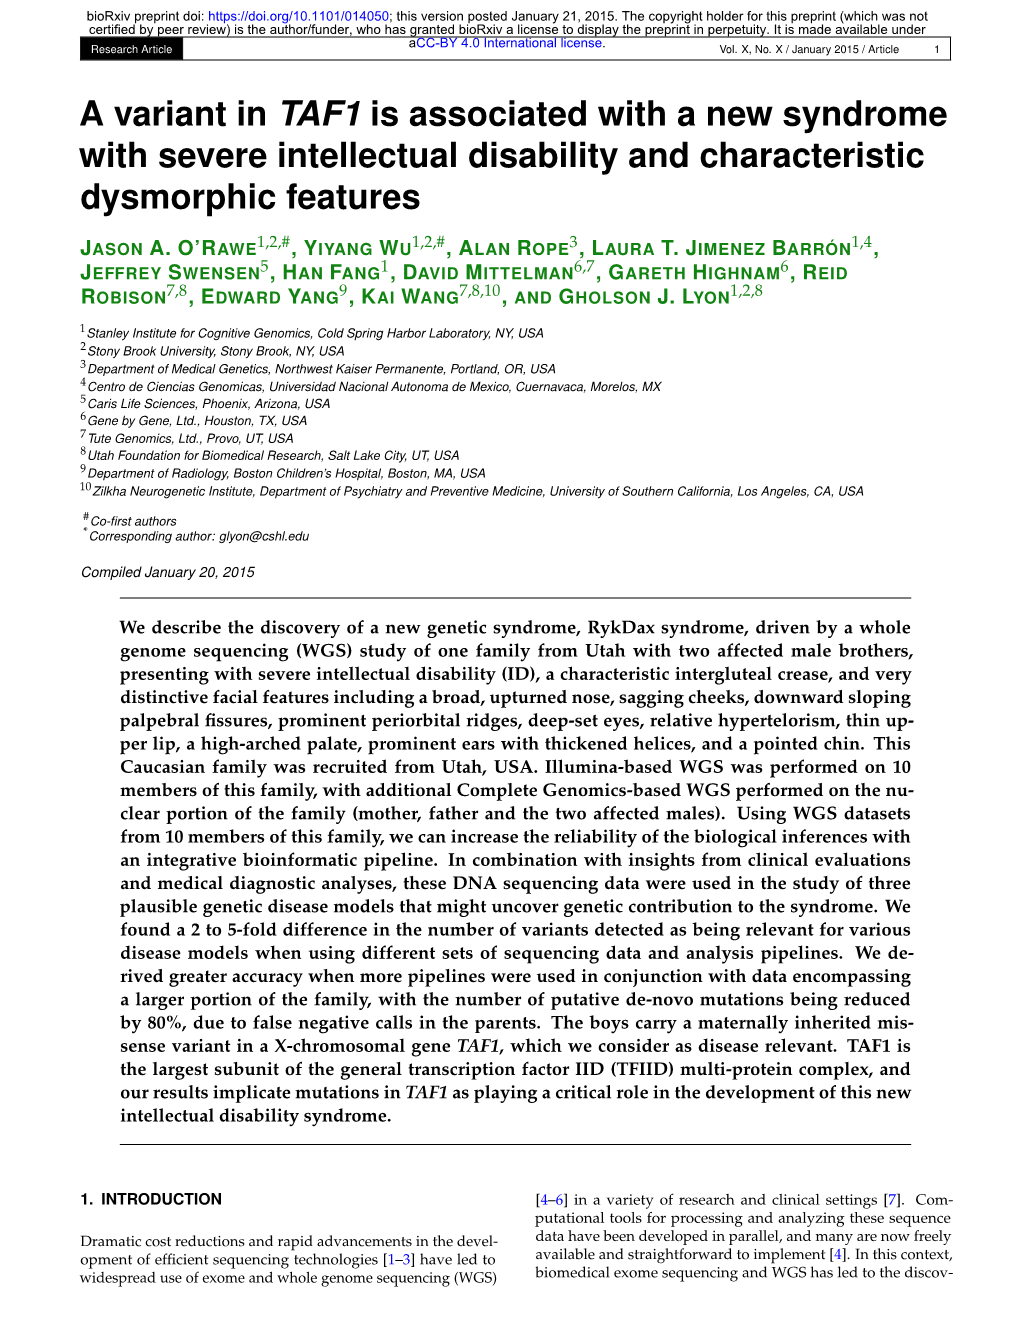 A Variant in TAF1 Is Associated with a New Syndrome with Severe Intellectual Disability and Characteristic Dysmorphic Features